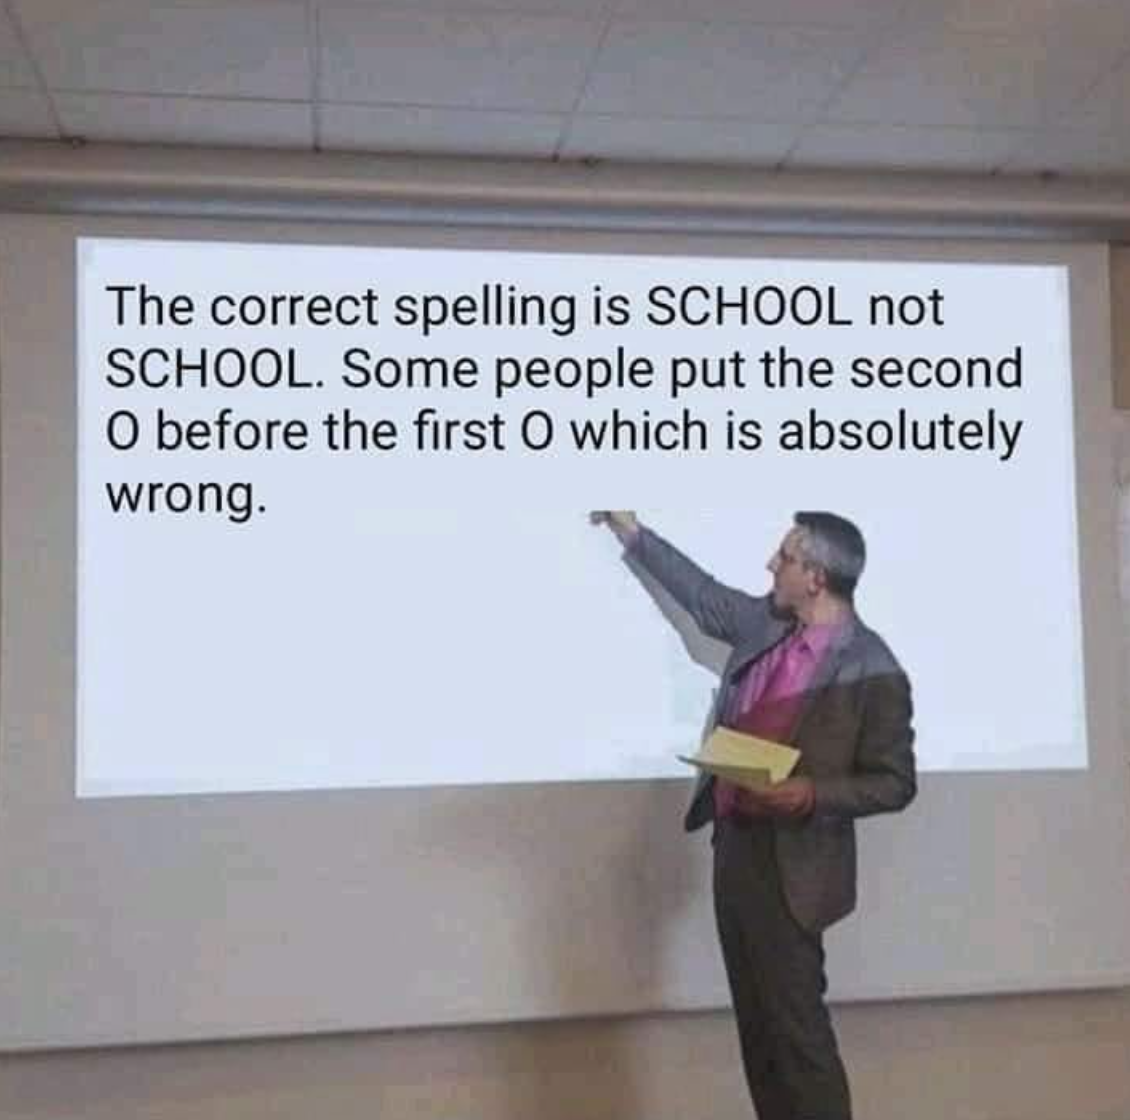 correct spelling is school not school - The correct spelling is School not School. Some people put the second O before the first O which is absolutely wrong.